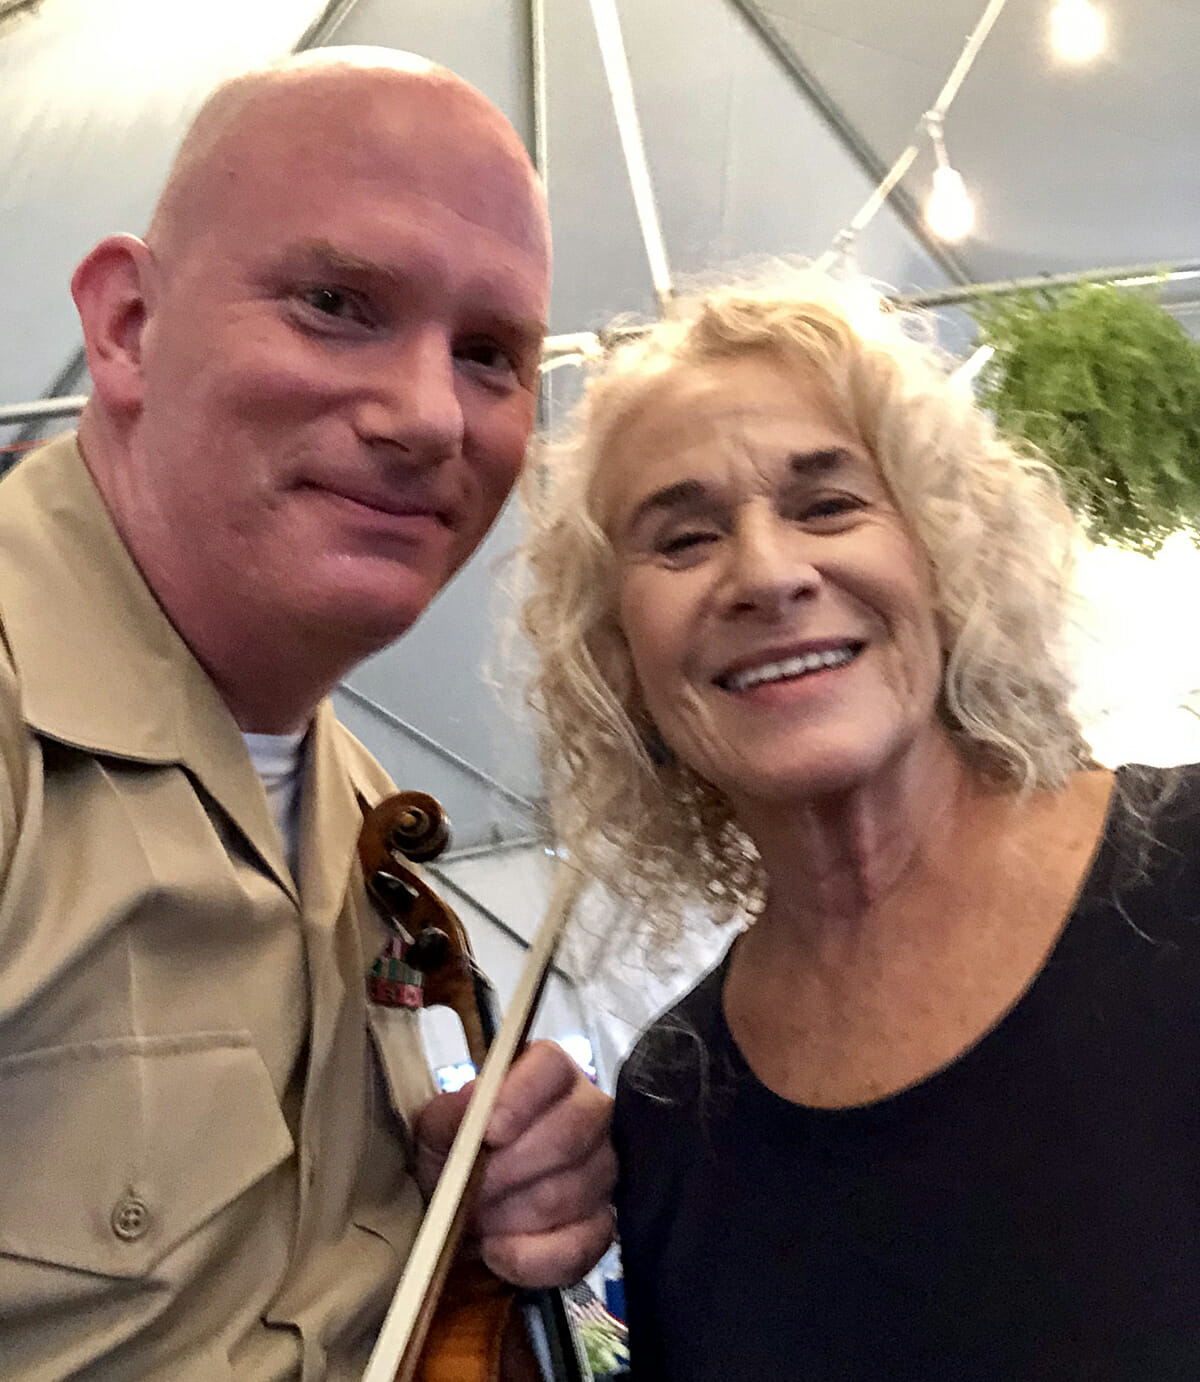 Peter takes a selfie with songwriting legend Carole King